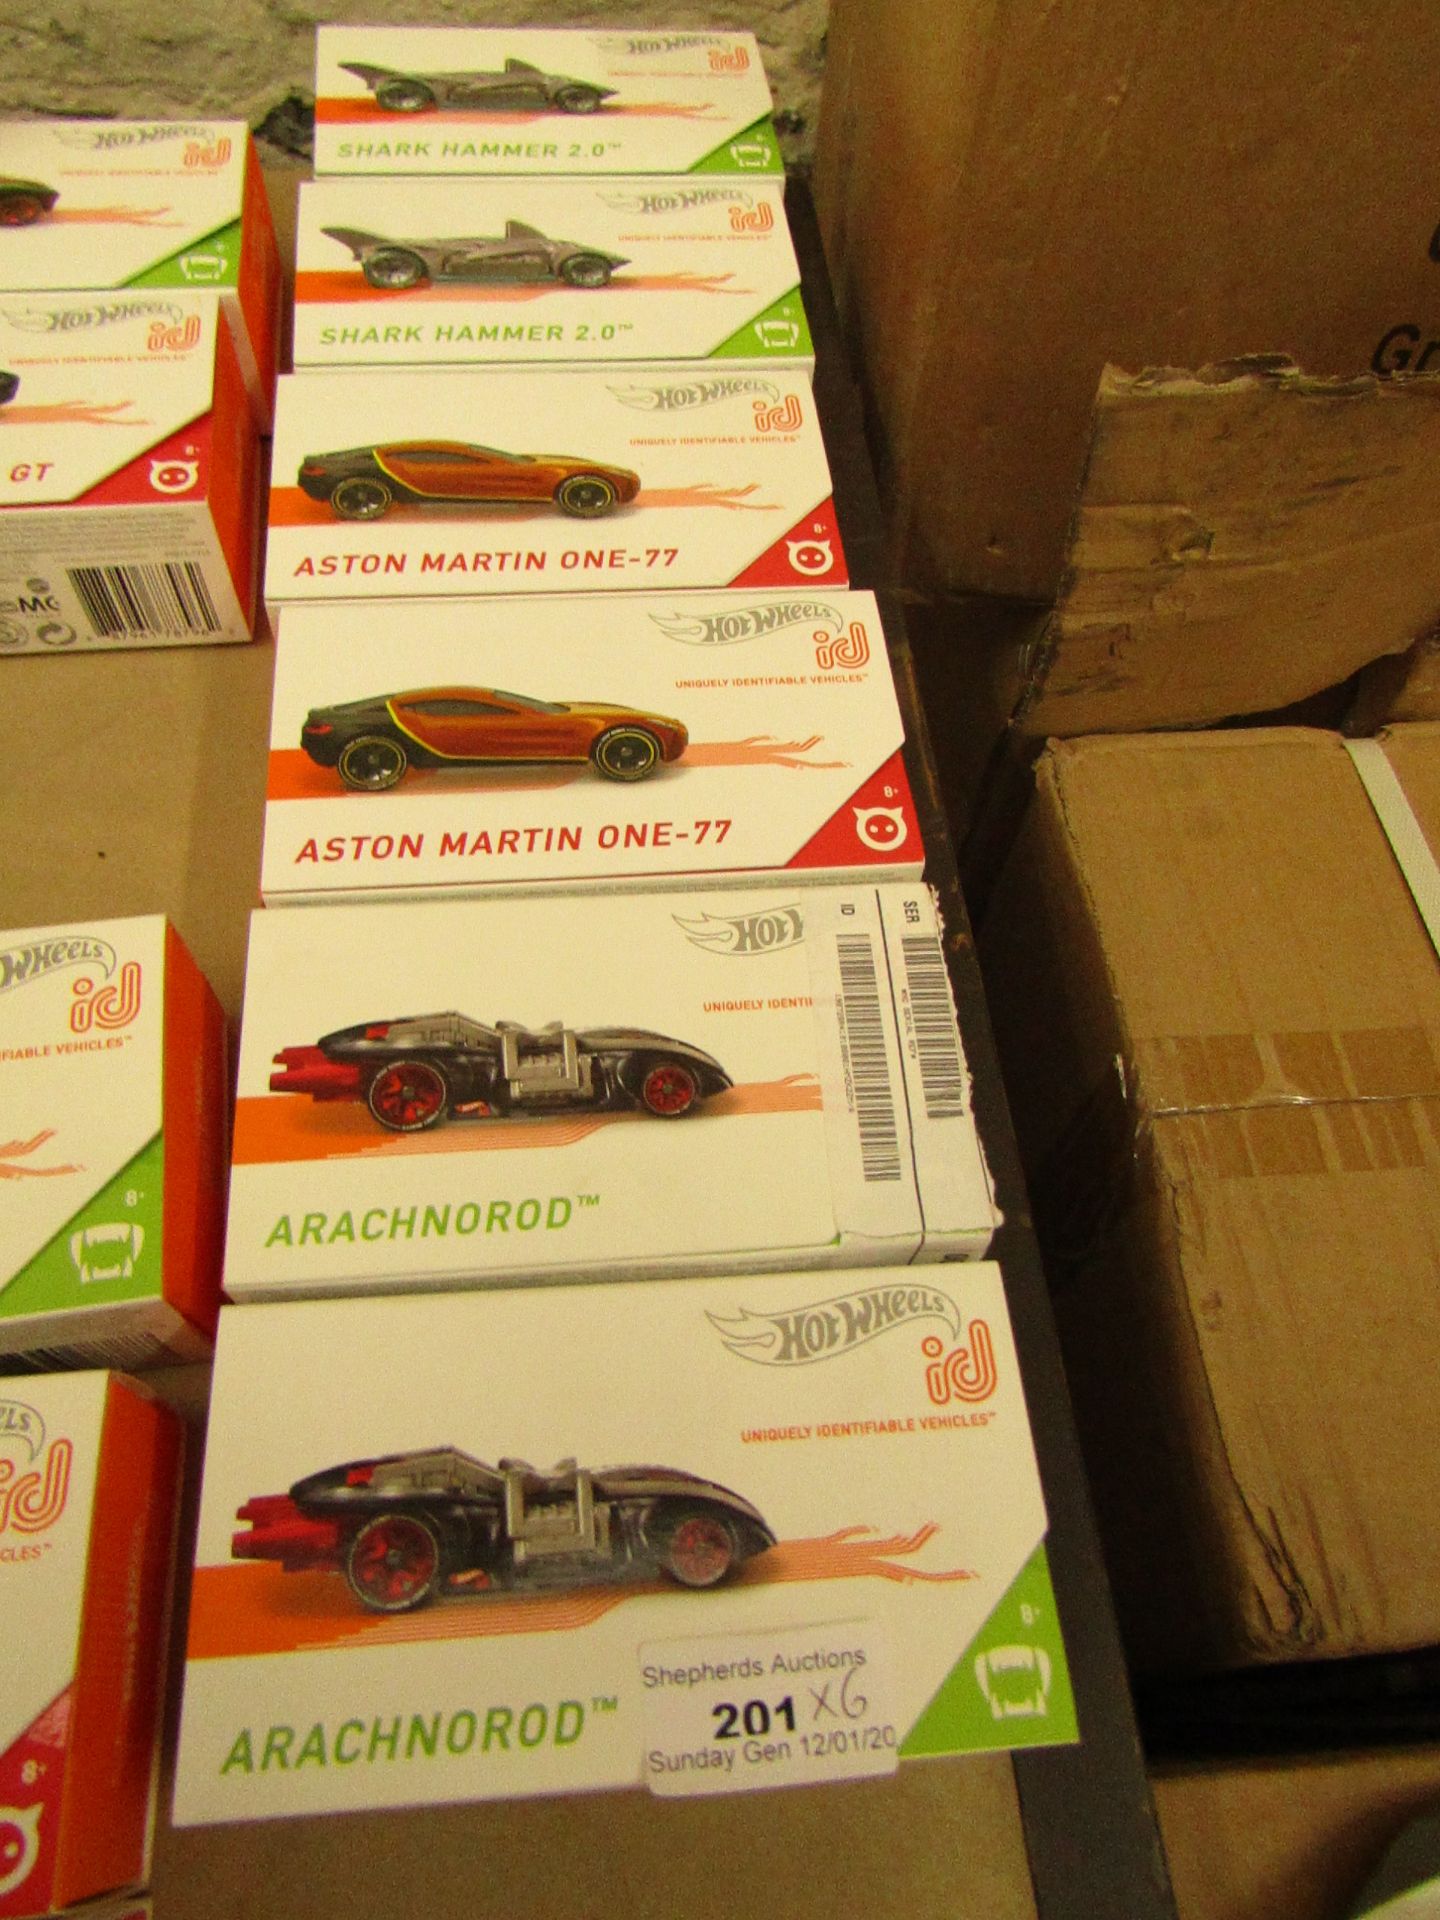 5 x Hot Wheels Toy Cars. New & Boxed. See Image for designs